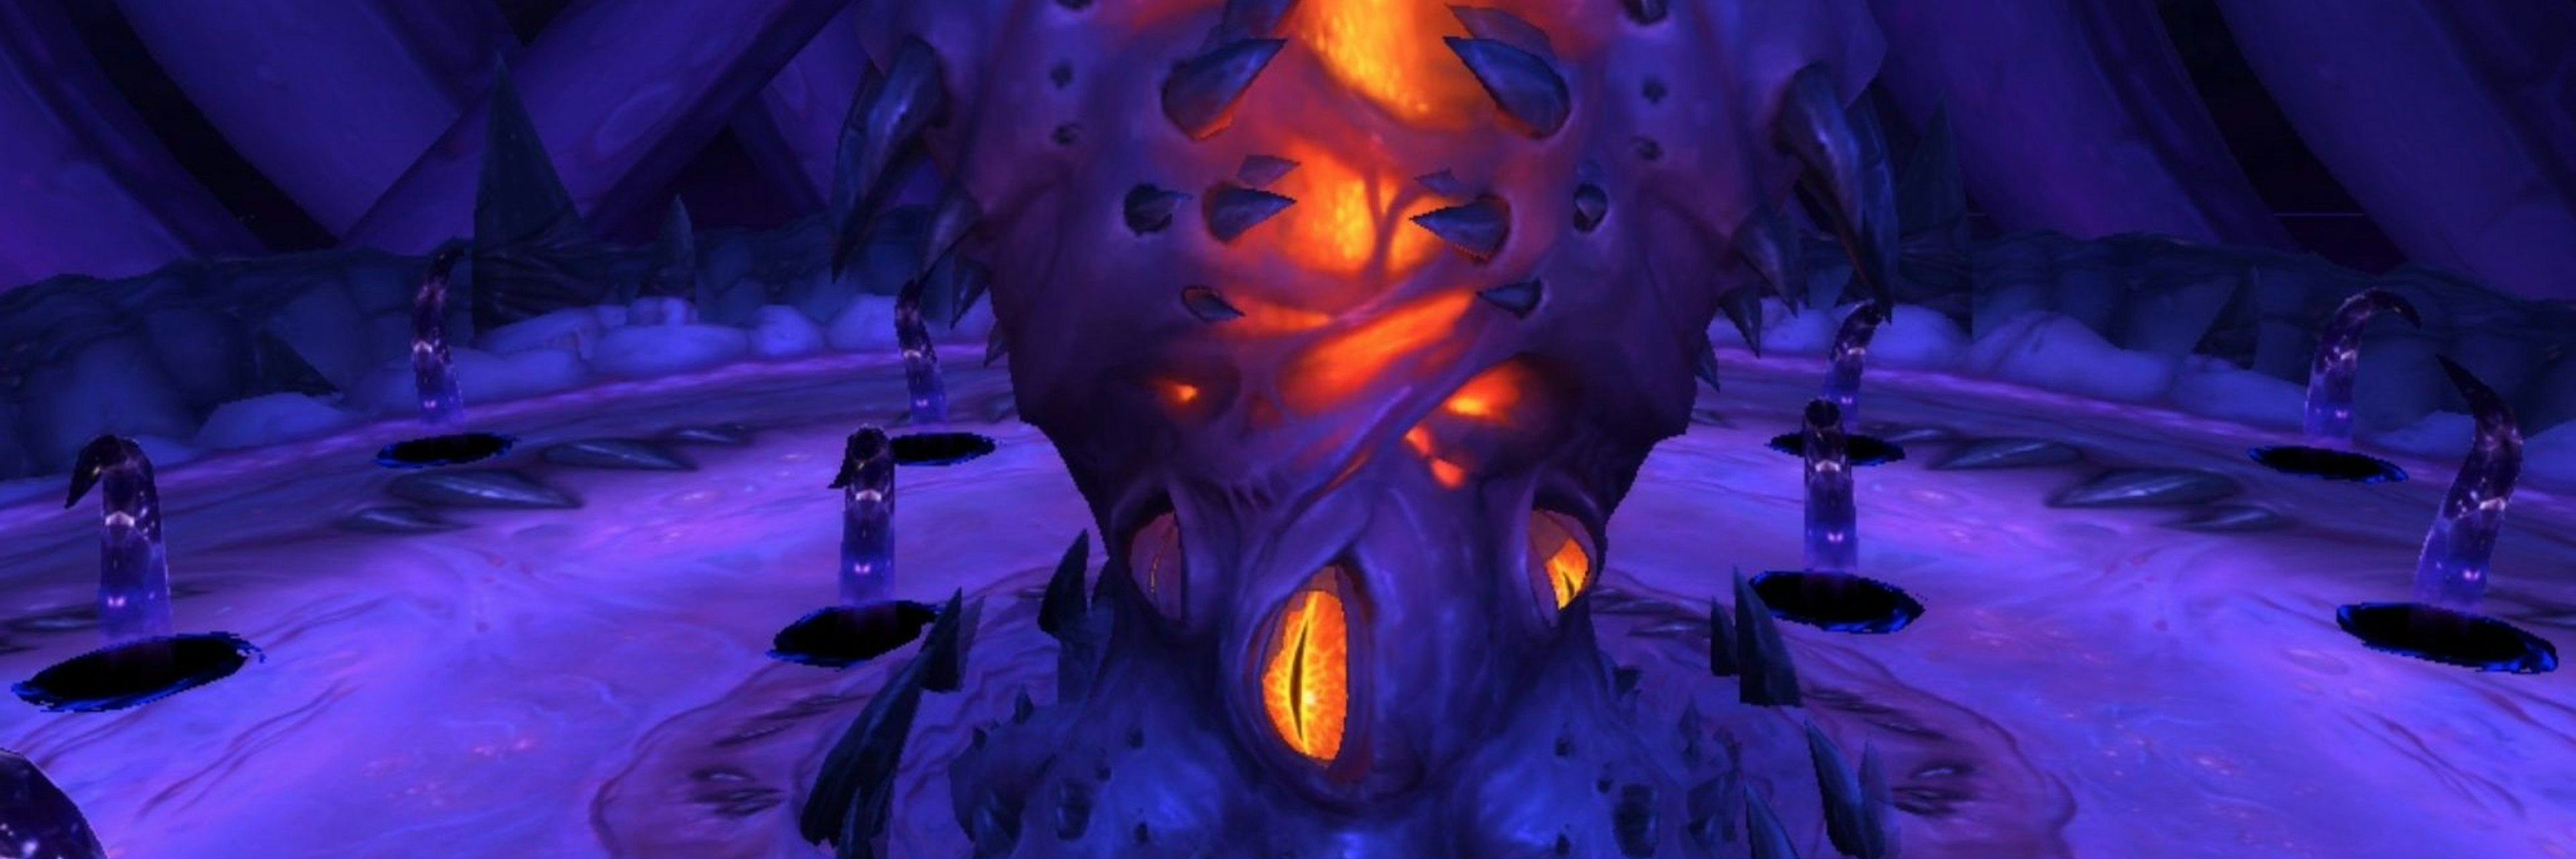 A screenshot of N'Zoth the Corrupter, a giant squid-like creature from World of Warcraft